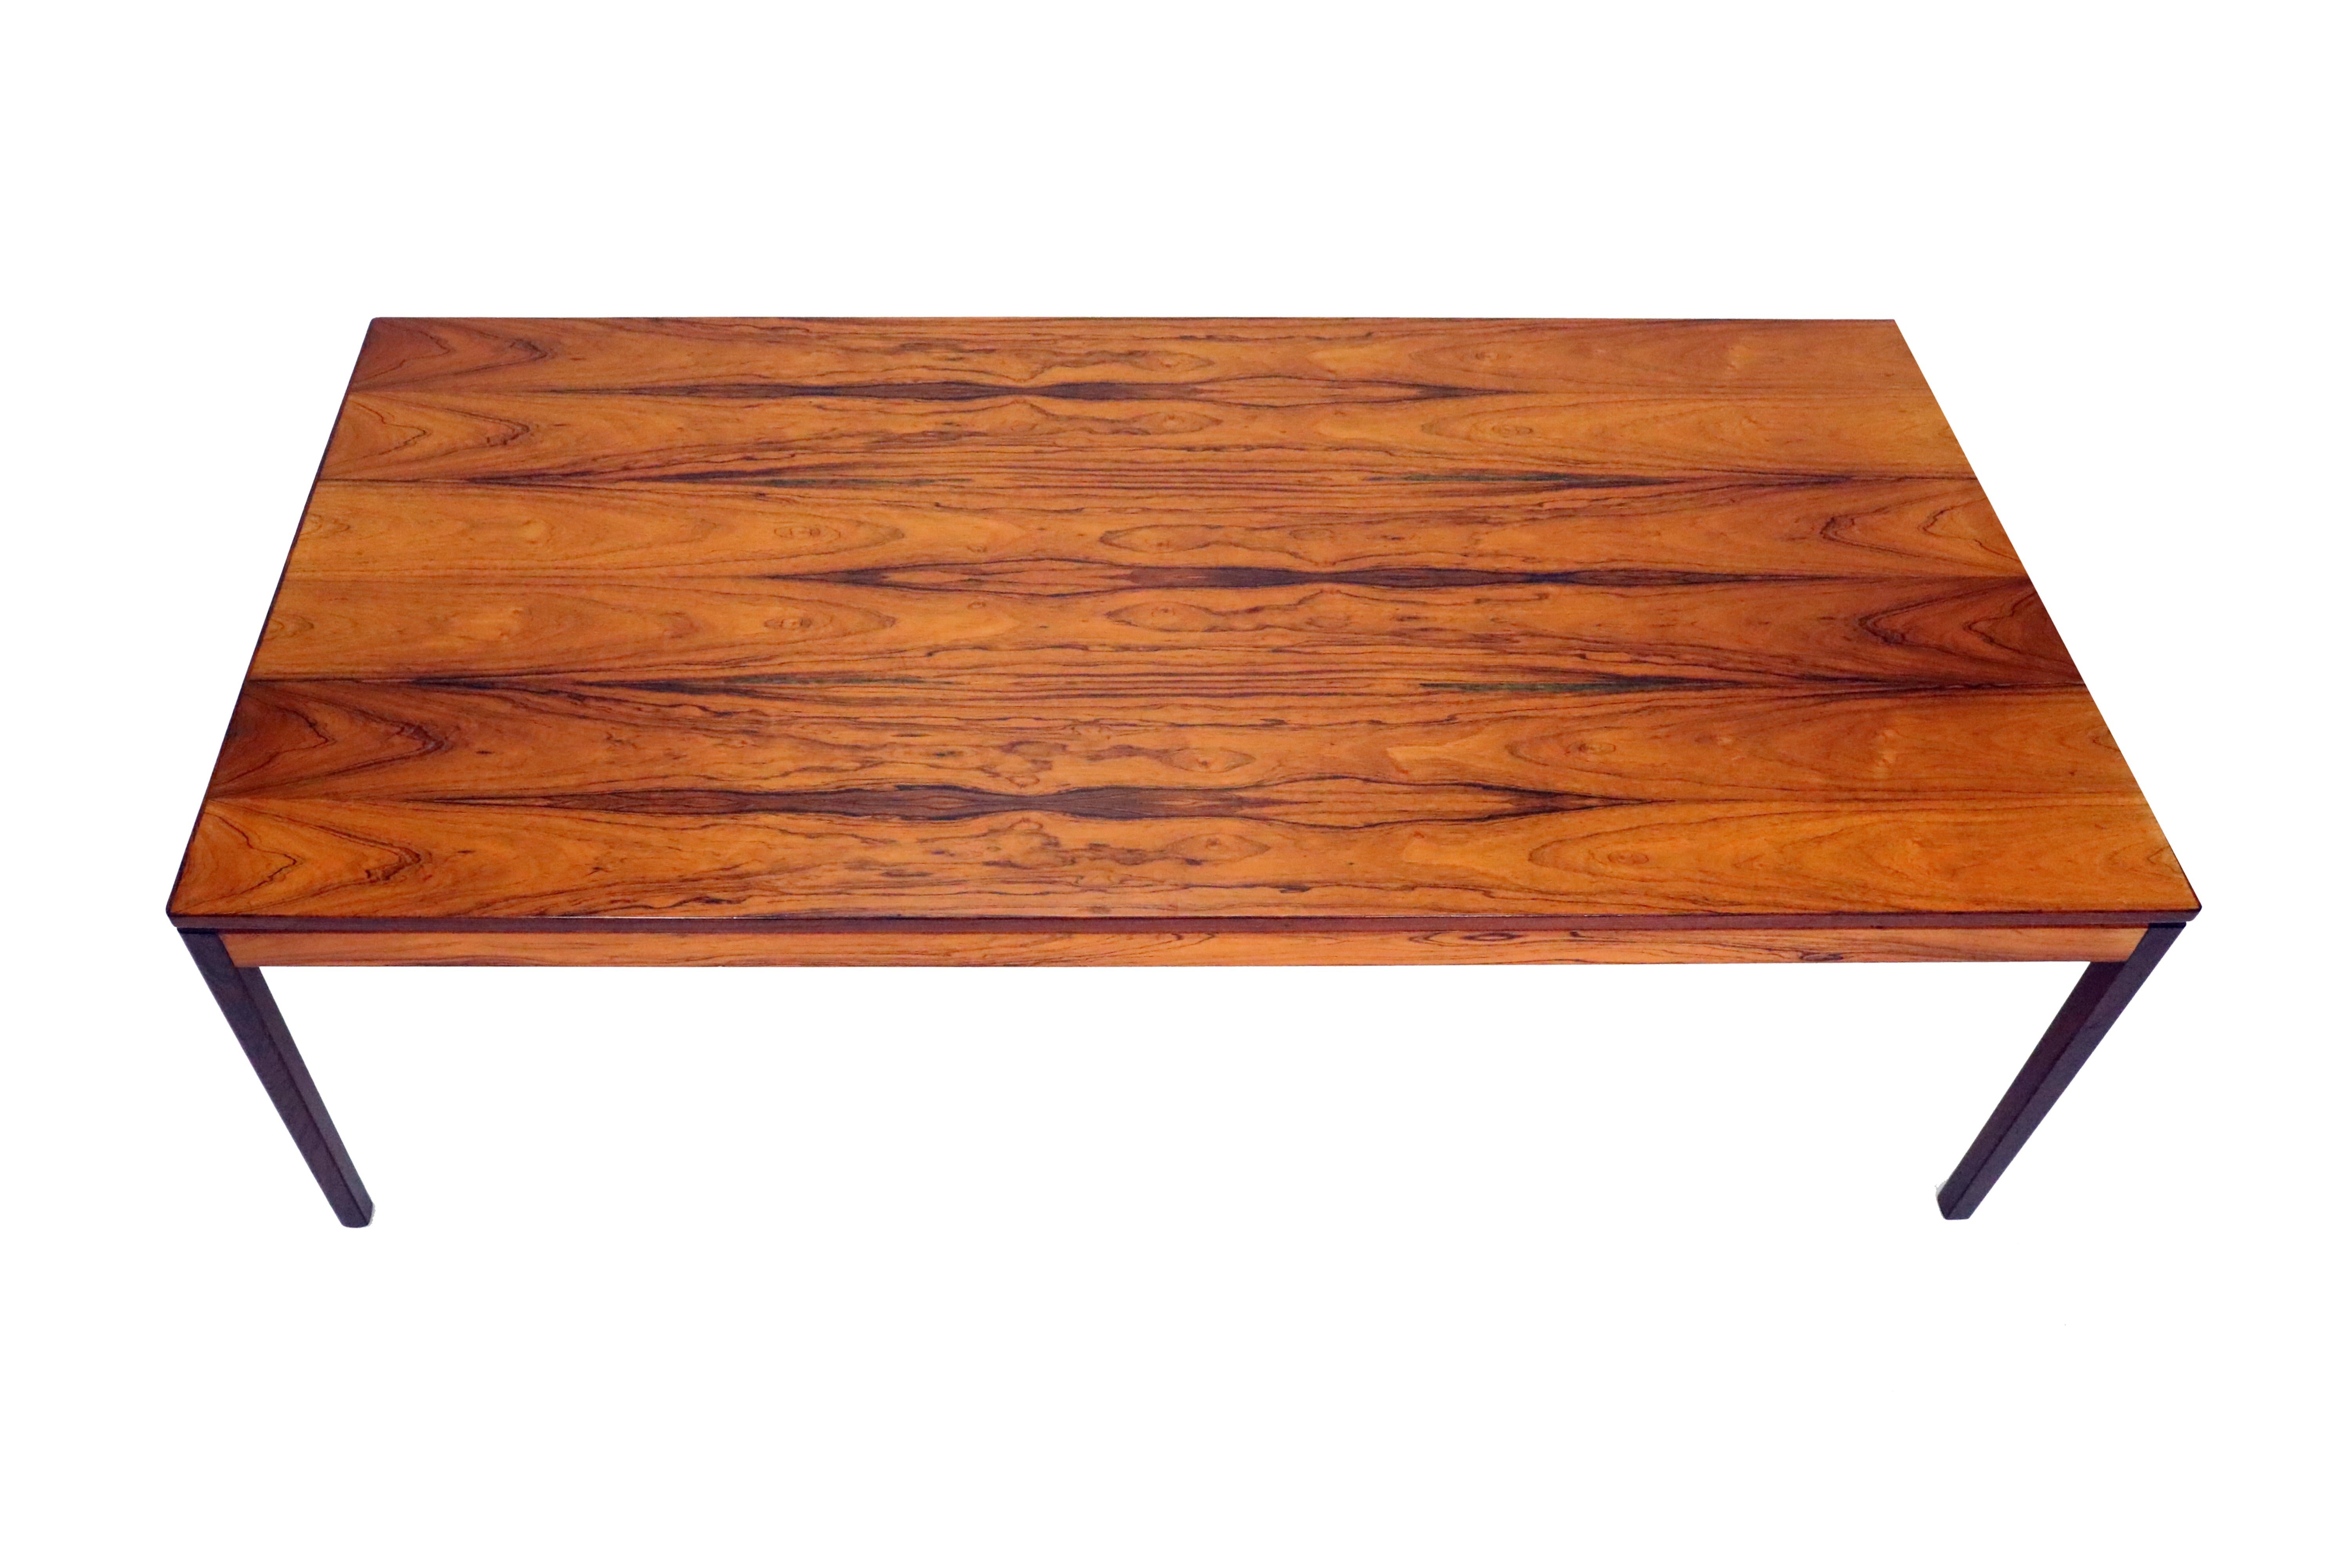 A stunning Norwegian mid-century rosewood coffee table by P.S. Heggen.